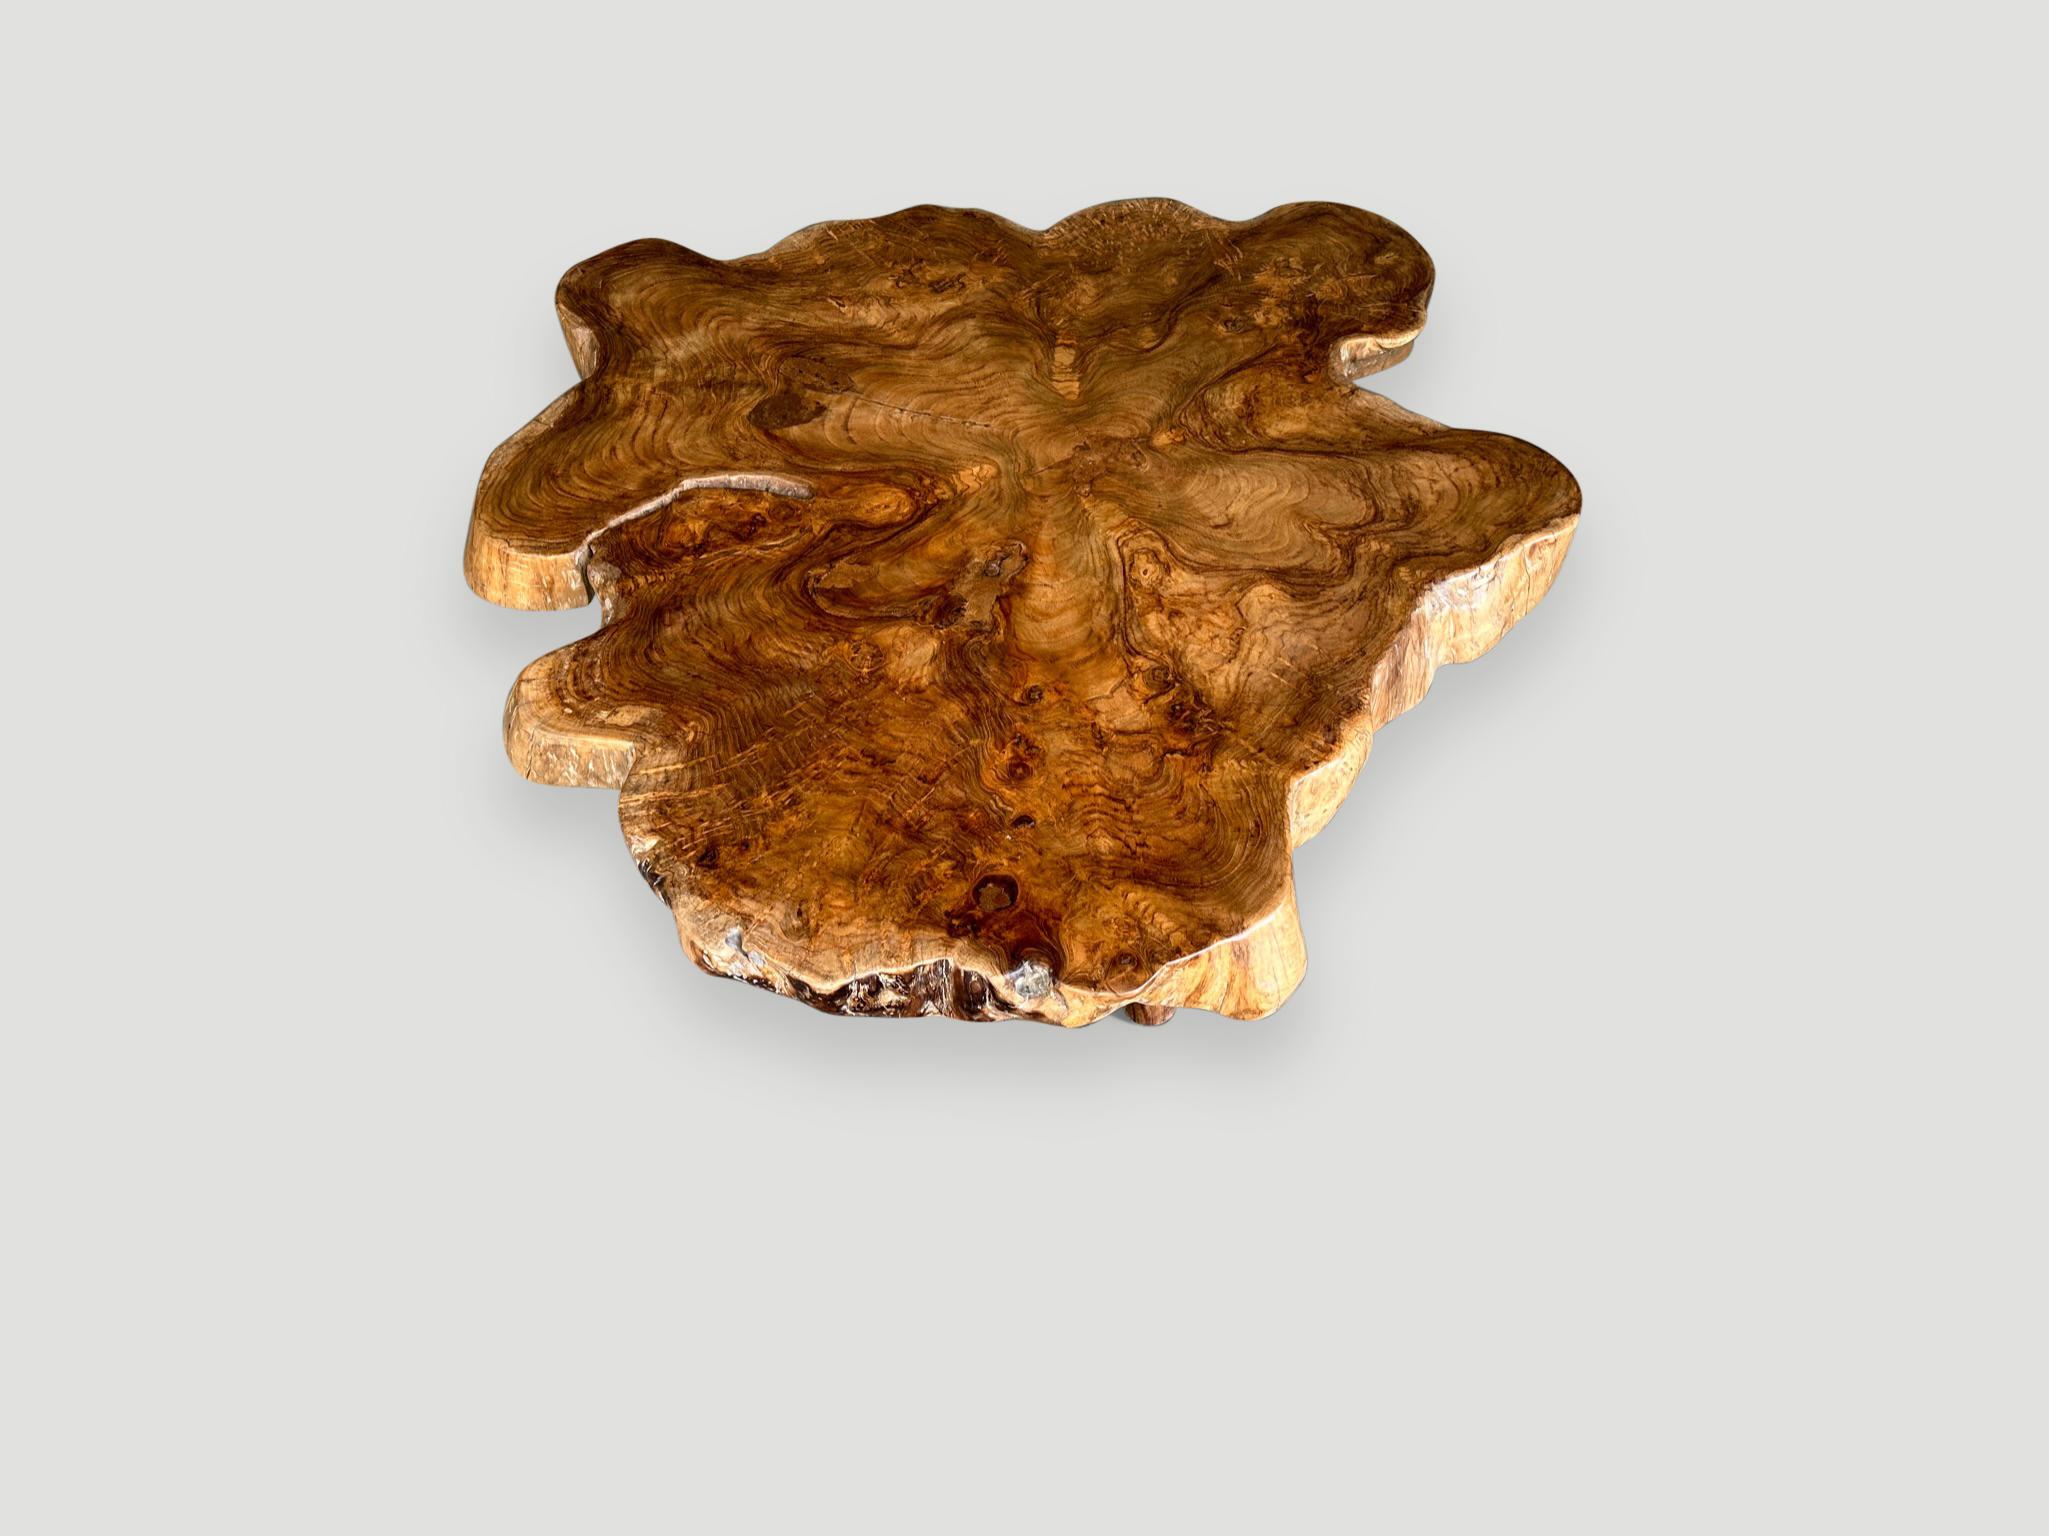 Andrianna Shamaris Teak Burl Wood Live Edge Coffee Table In Excellent Condition For Sale In New York, NY